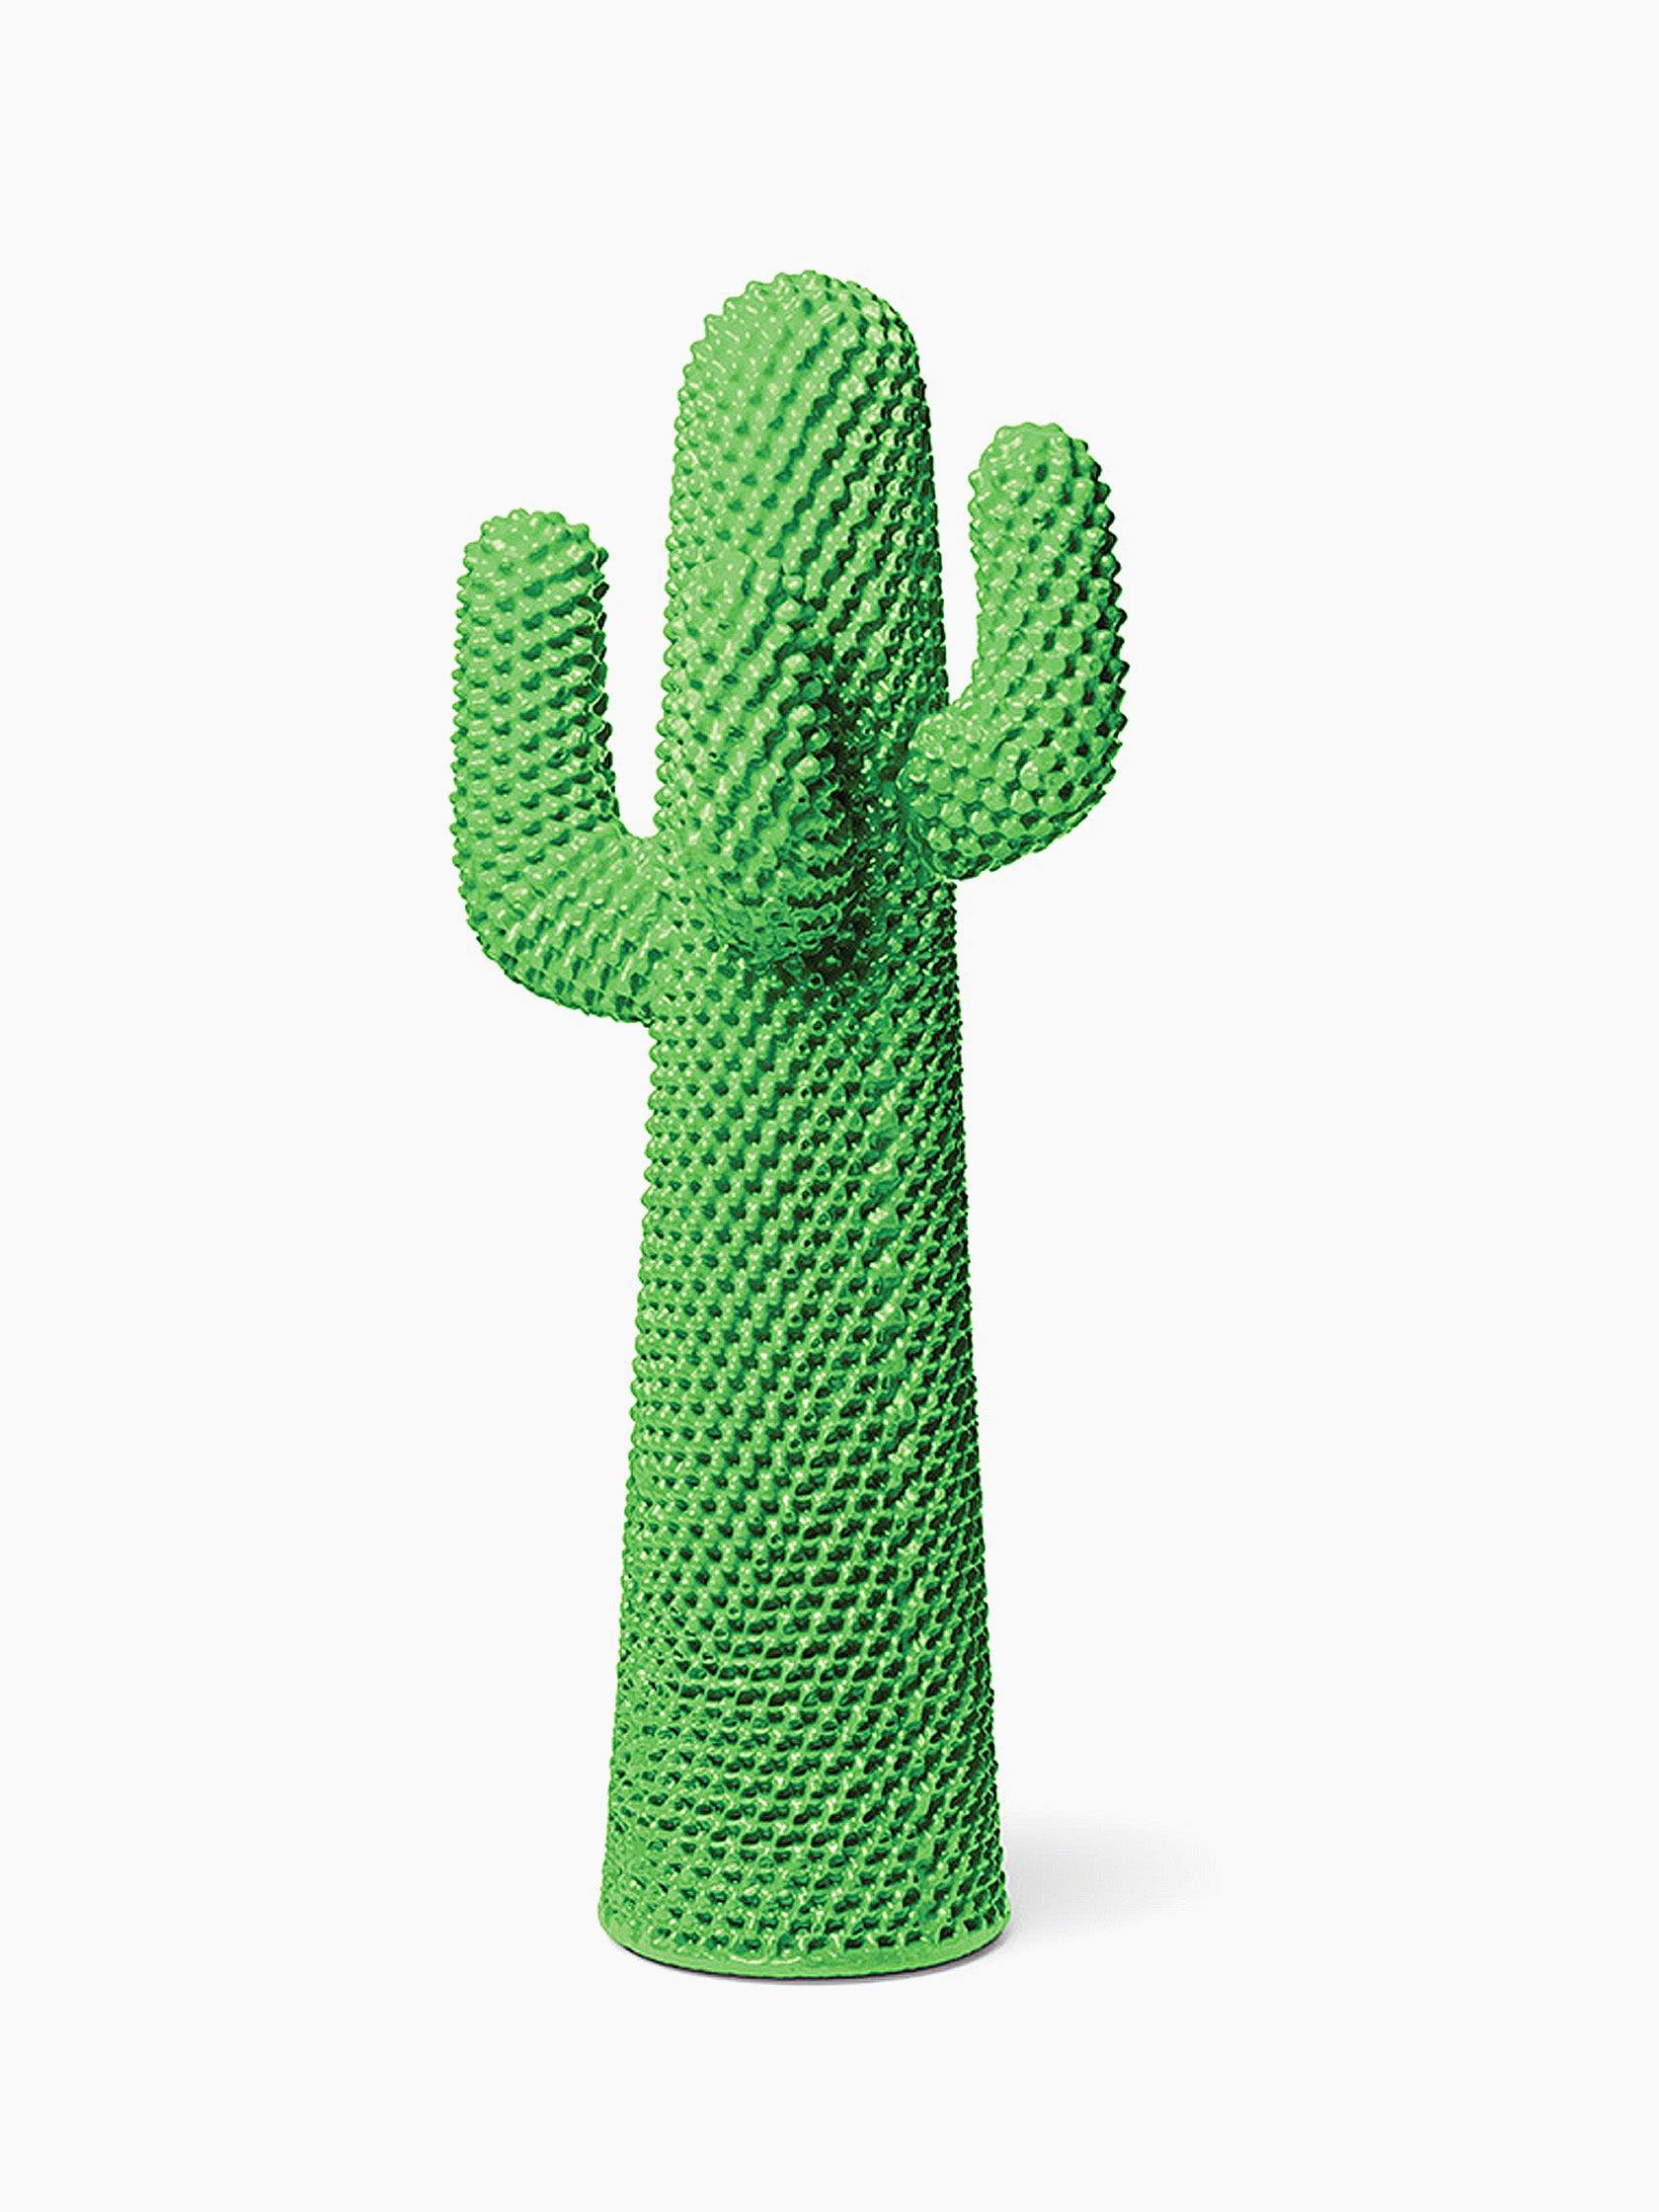 Another Green Cactus by Gufram - Mankovsky Gallery